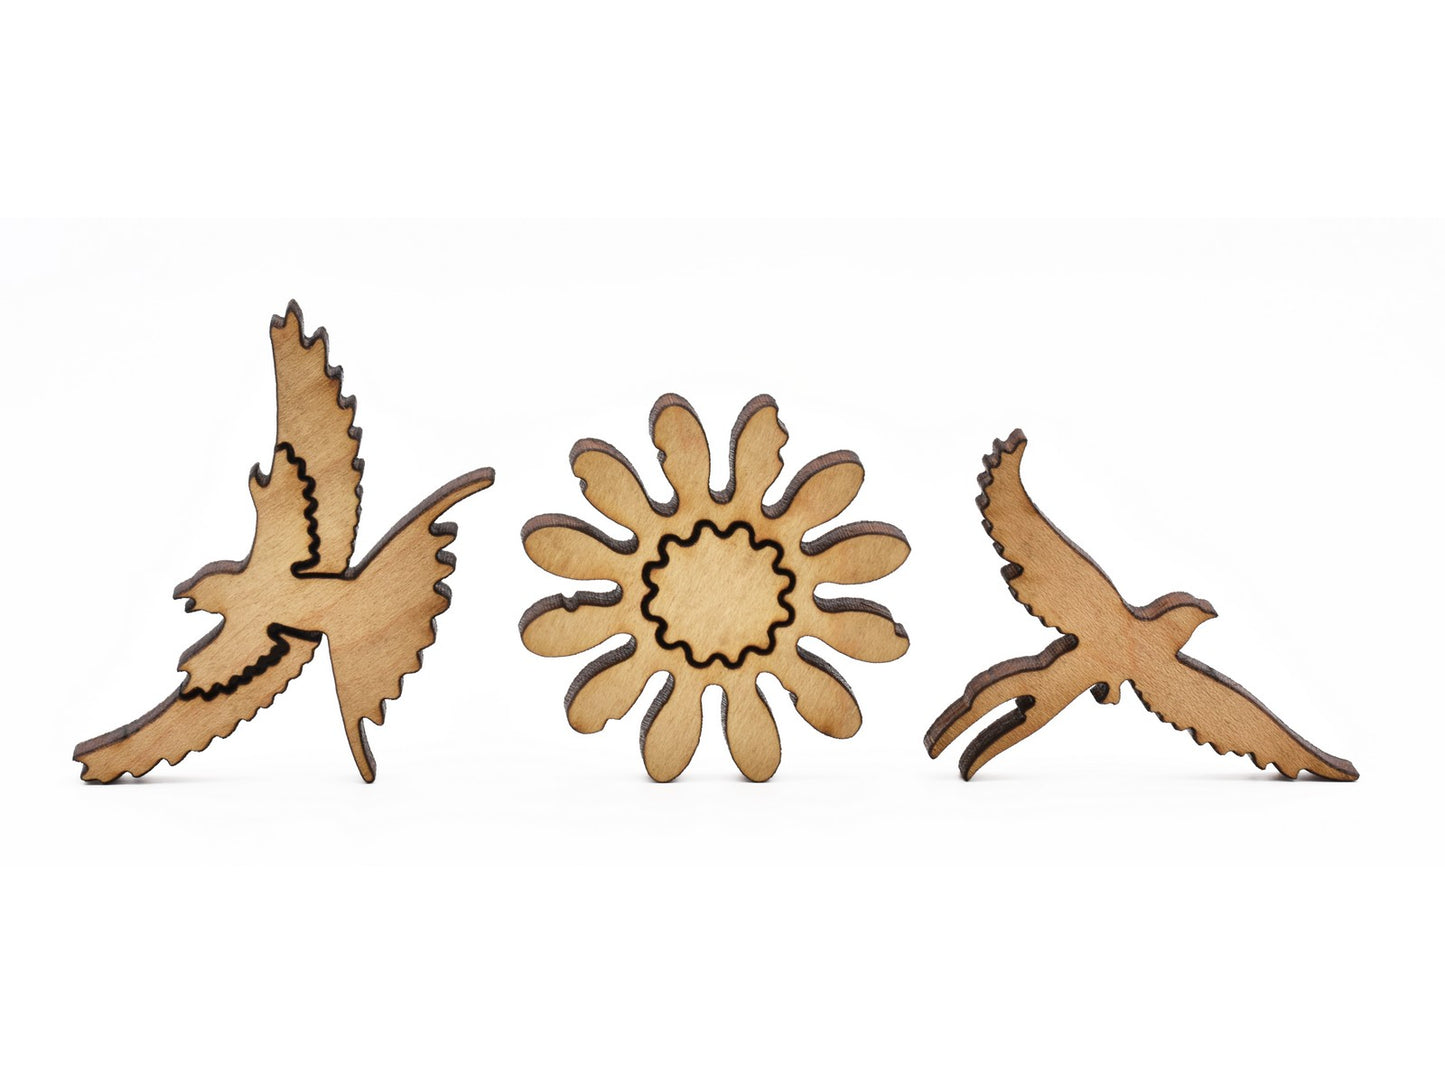 A closeup of pieces in the shape of birds and a flower.